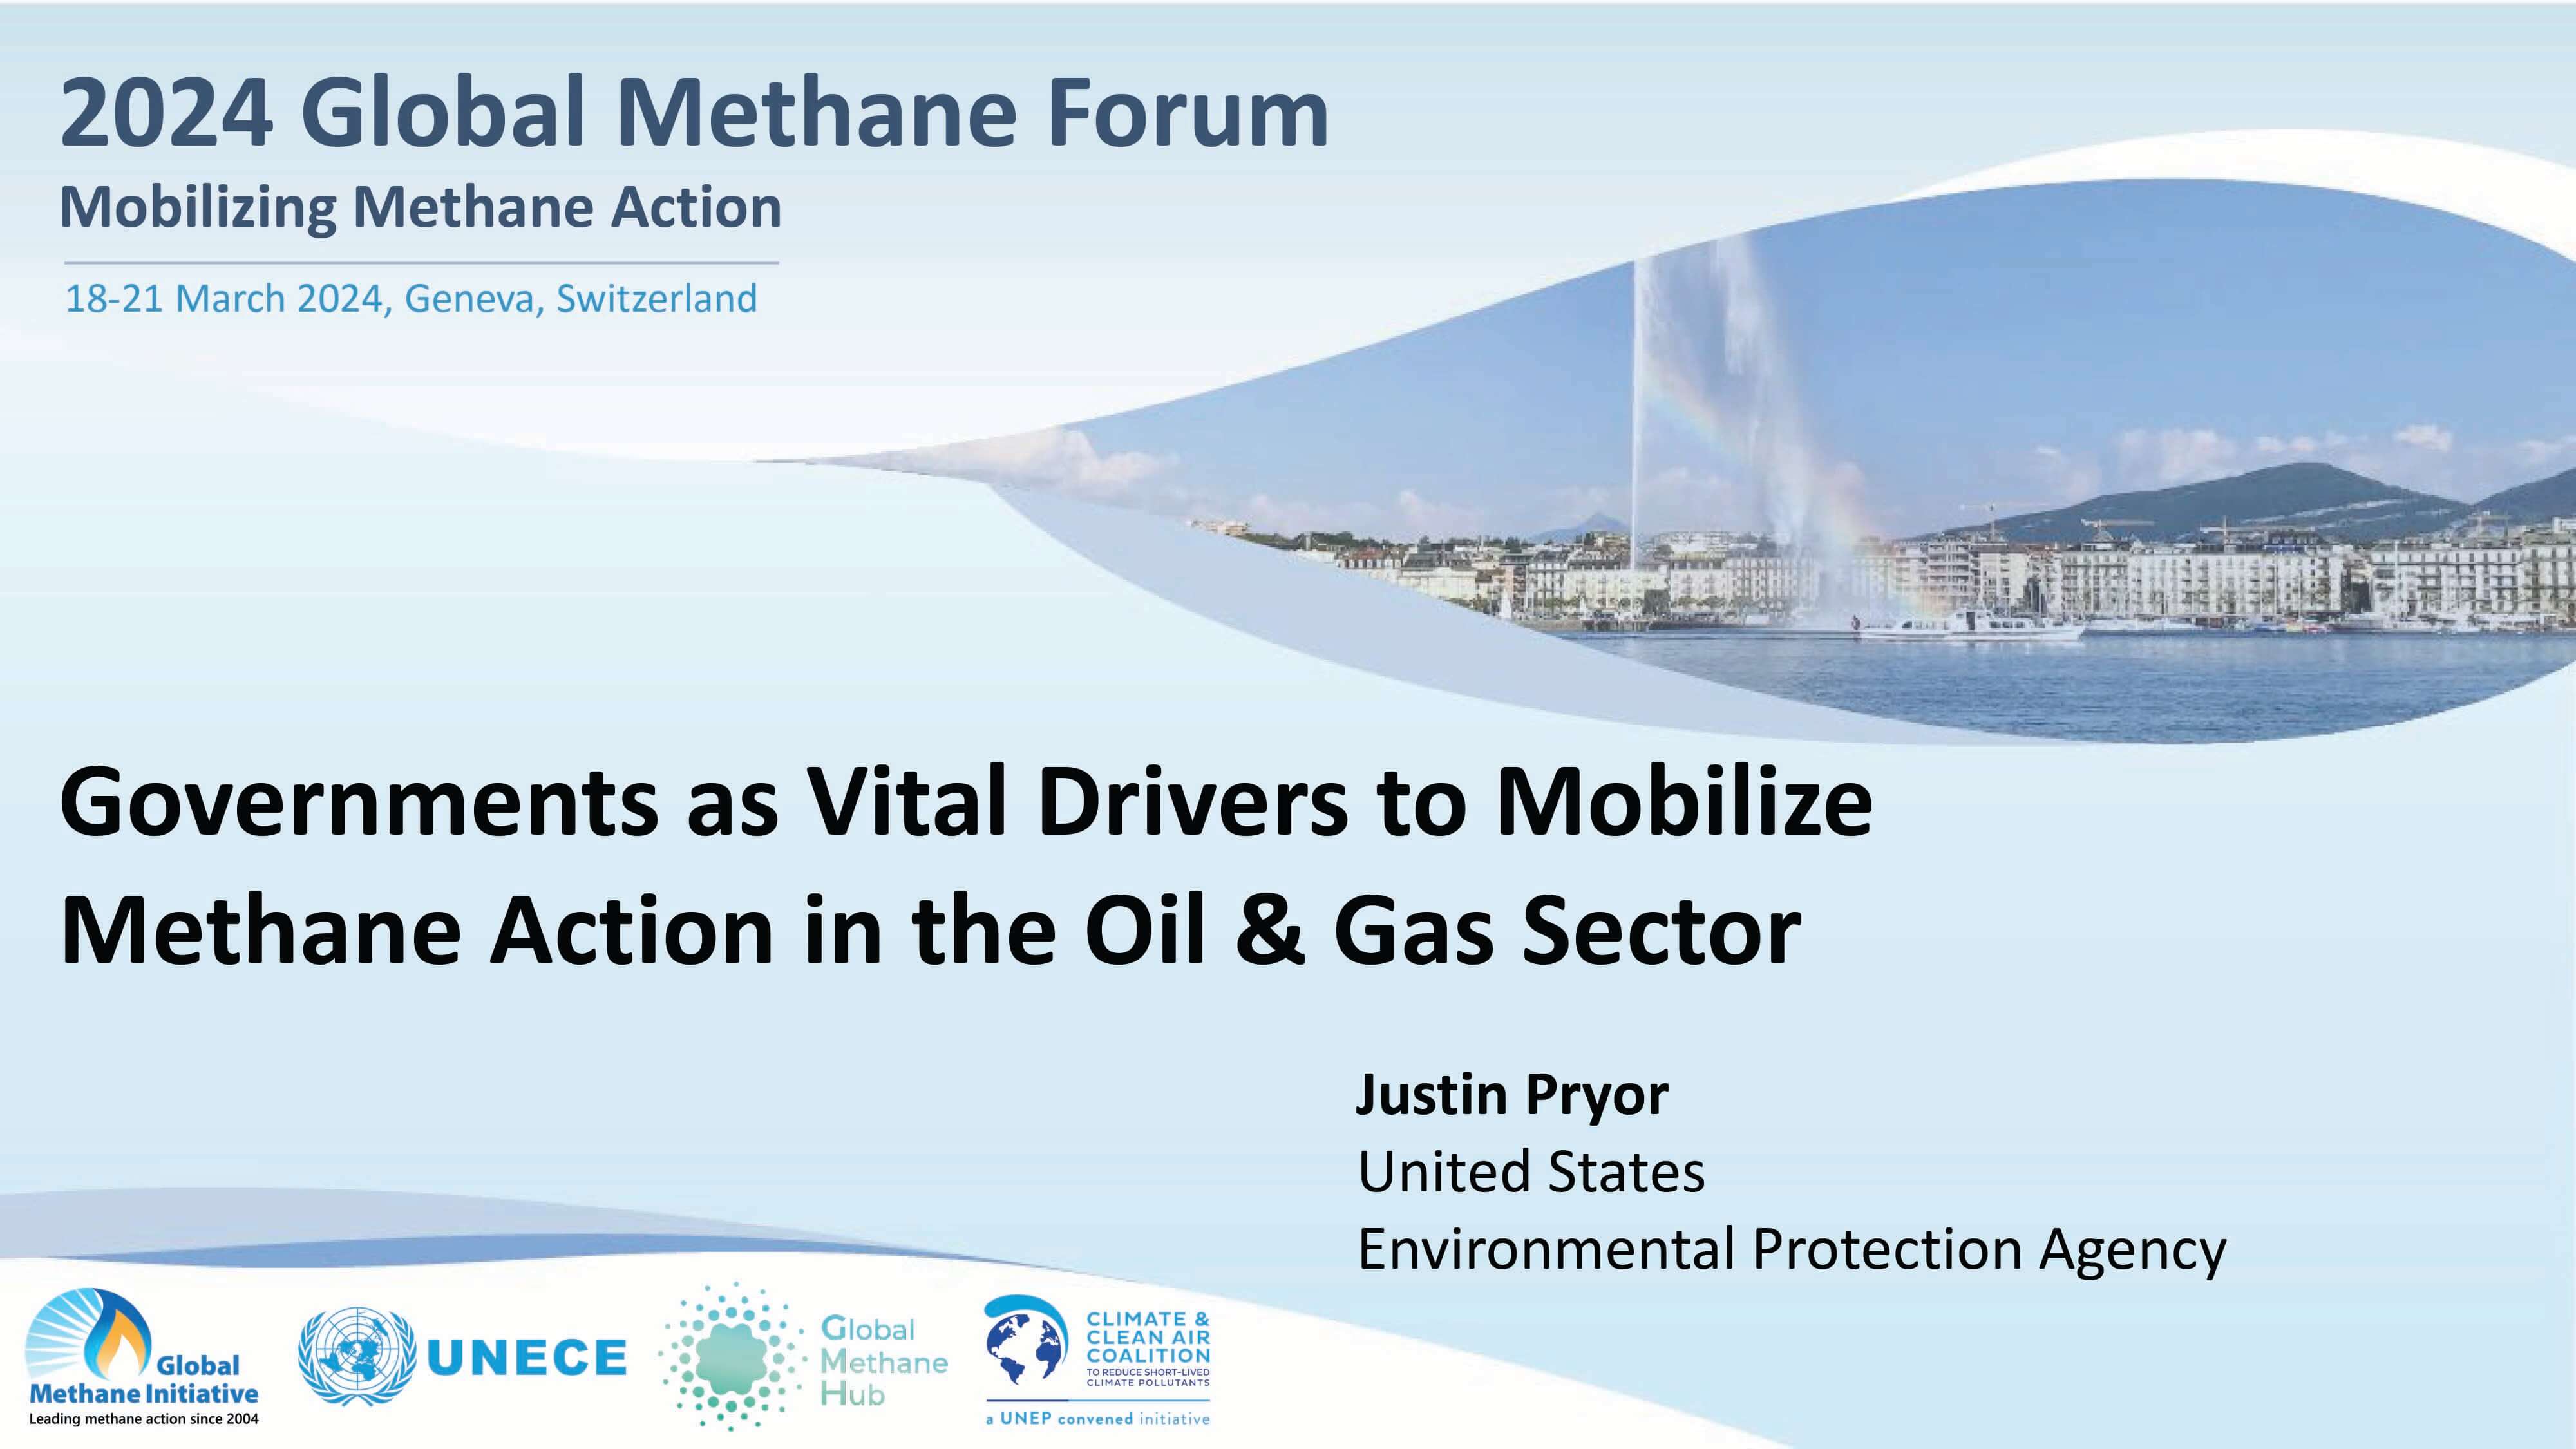 Governments as Vital Drivers to Mobilize Methane Action in the Oil & Gas Sector